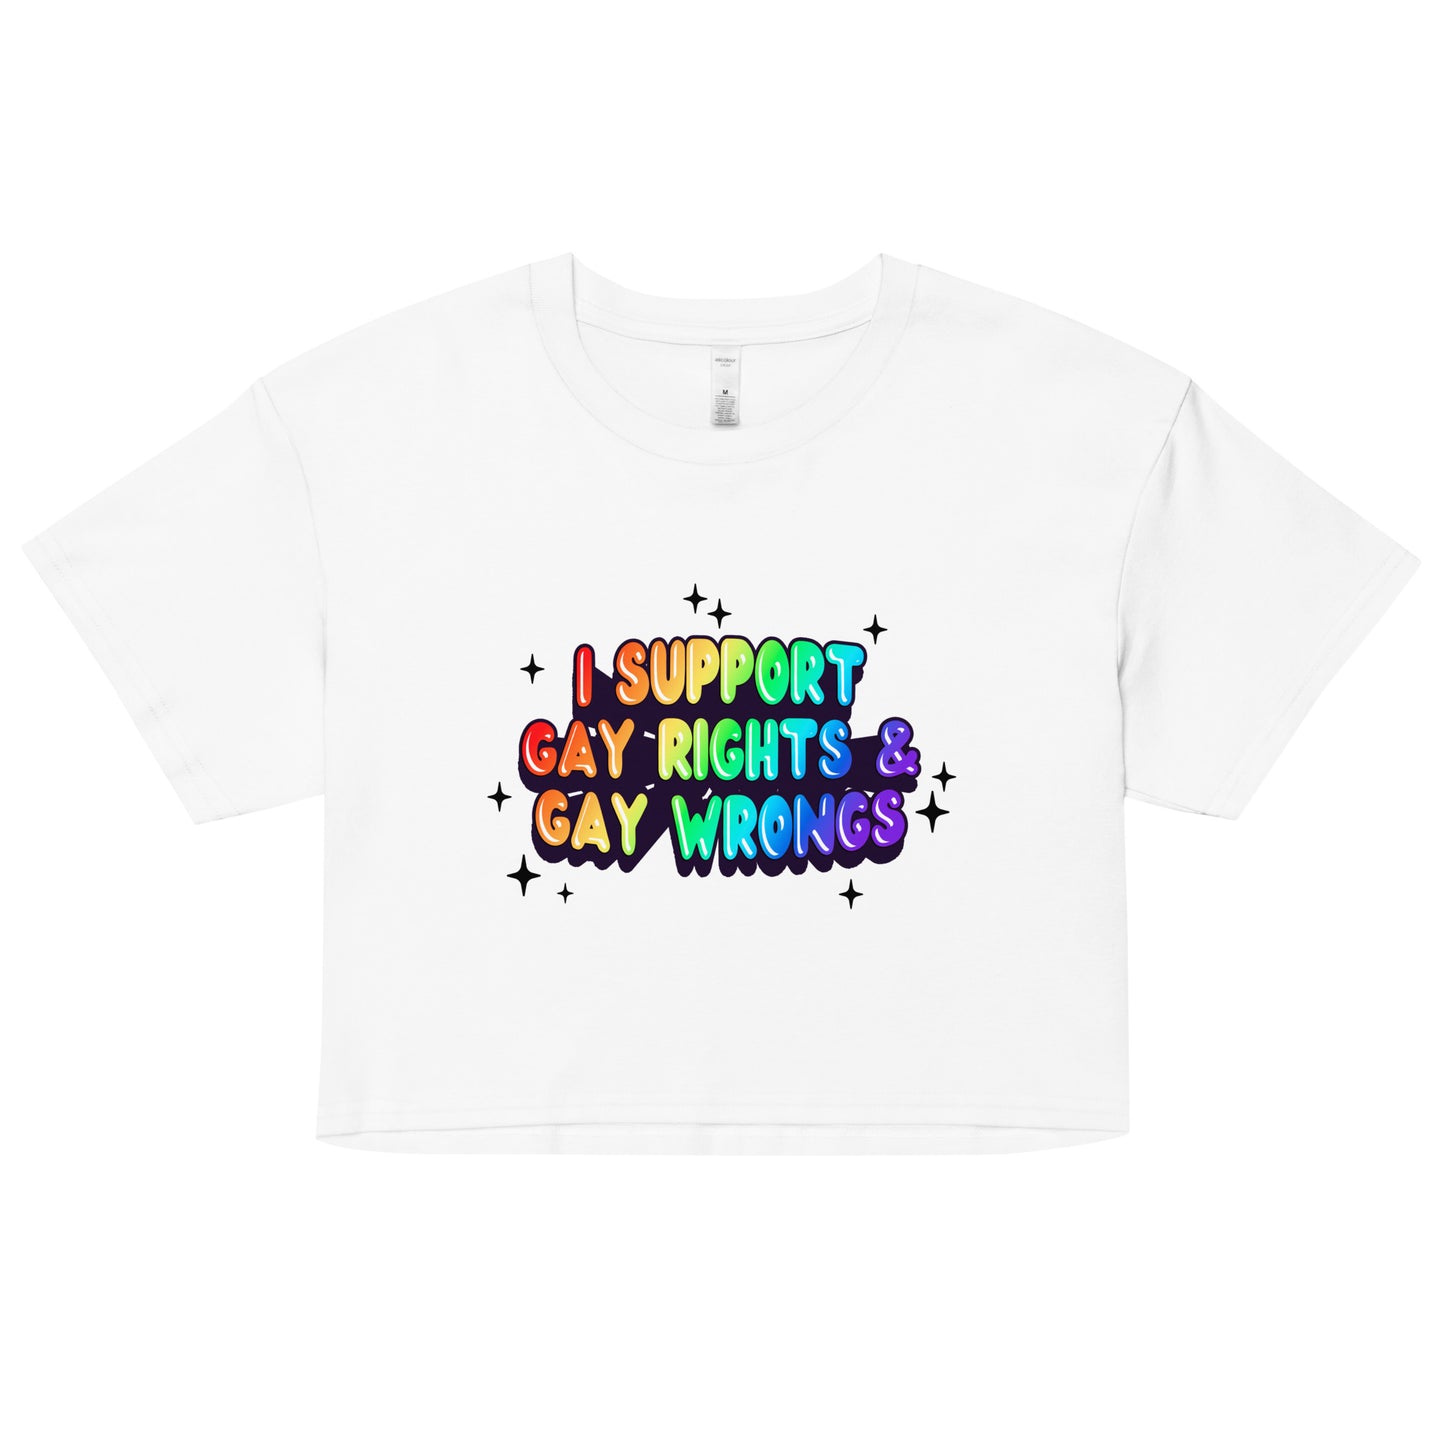 I Support Gay Rights & Gay Wrongs Women’s crop top